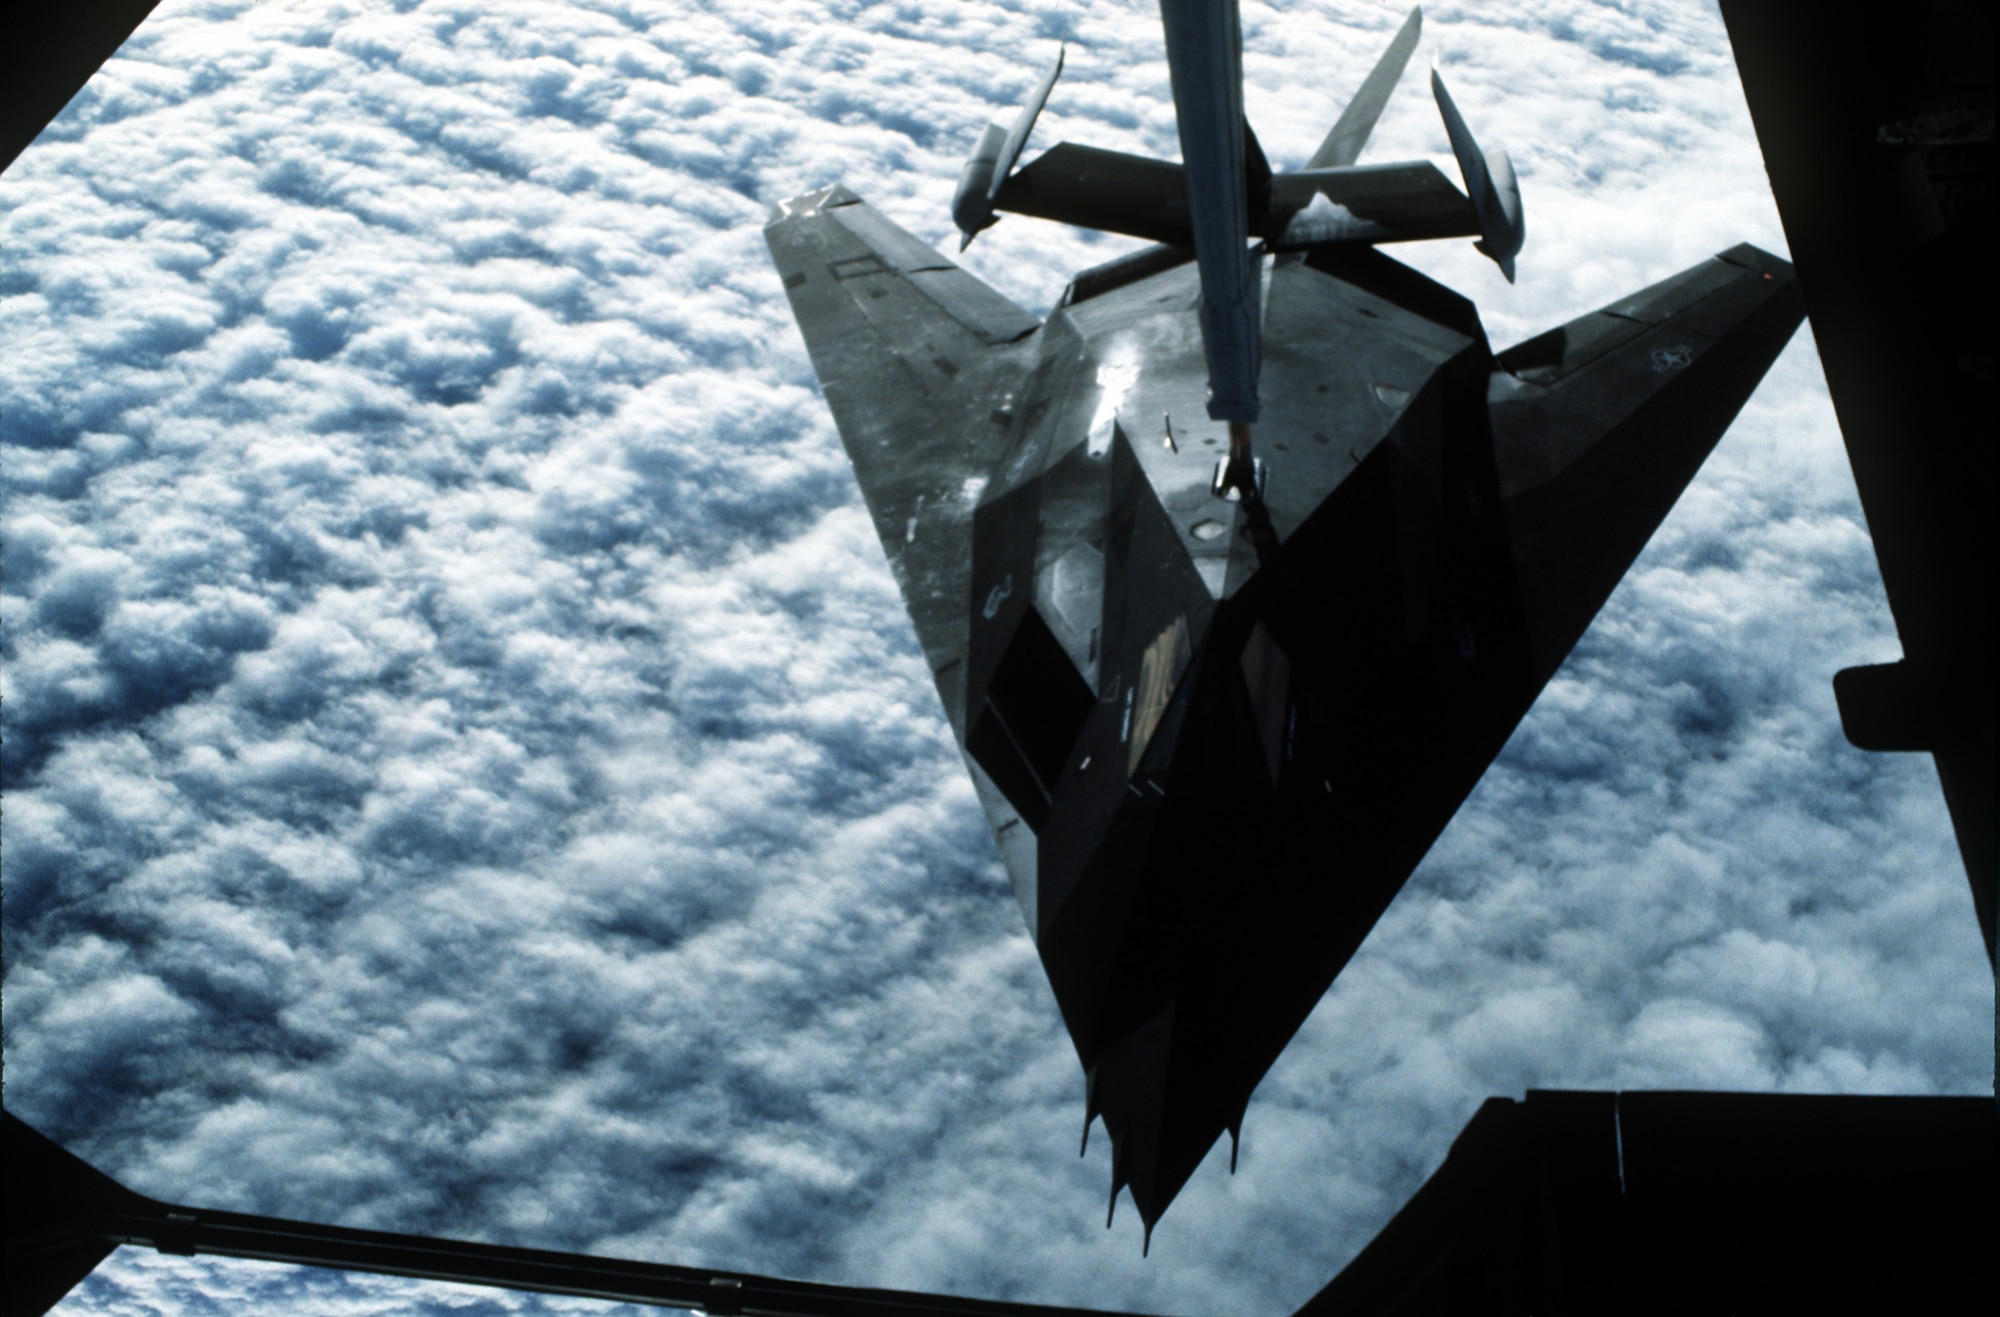 A U.S. Air Force F-117A Nighthawk stealth fighter aircraft from the 37th Tactical Fighter Wing refuels from a U.S. Air Force KC-10 Extender aircraft from the 22nd Air Refueling Wing. The Nighthawk is en route to Saudi Arabia in support of Operation Desert Shield. (U.S. Air Force Courtesy Photo)